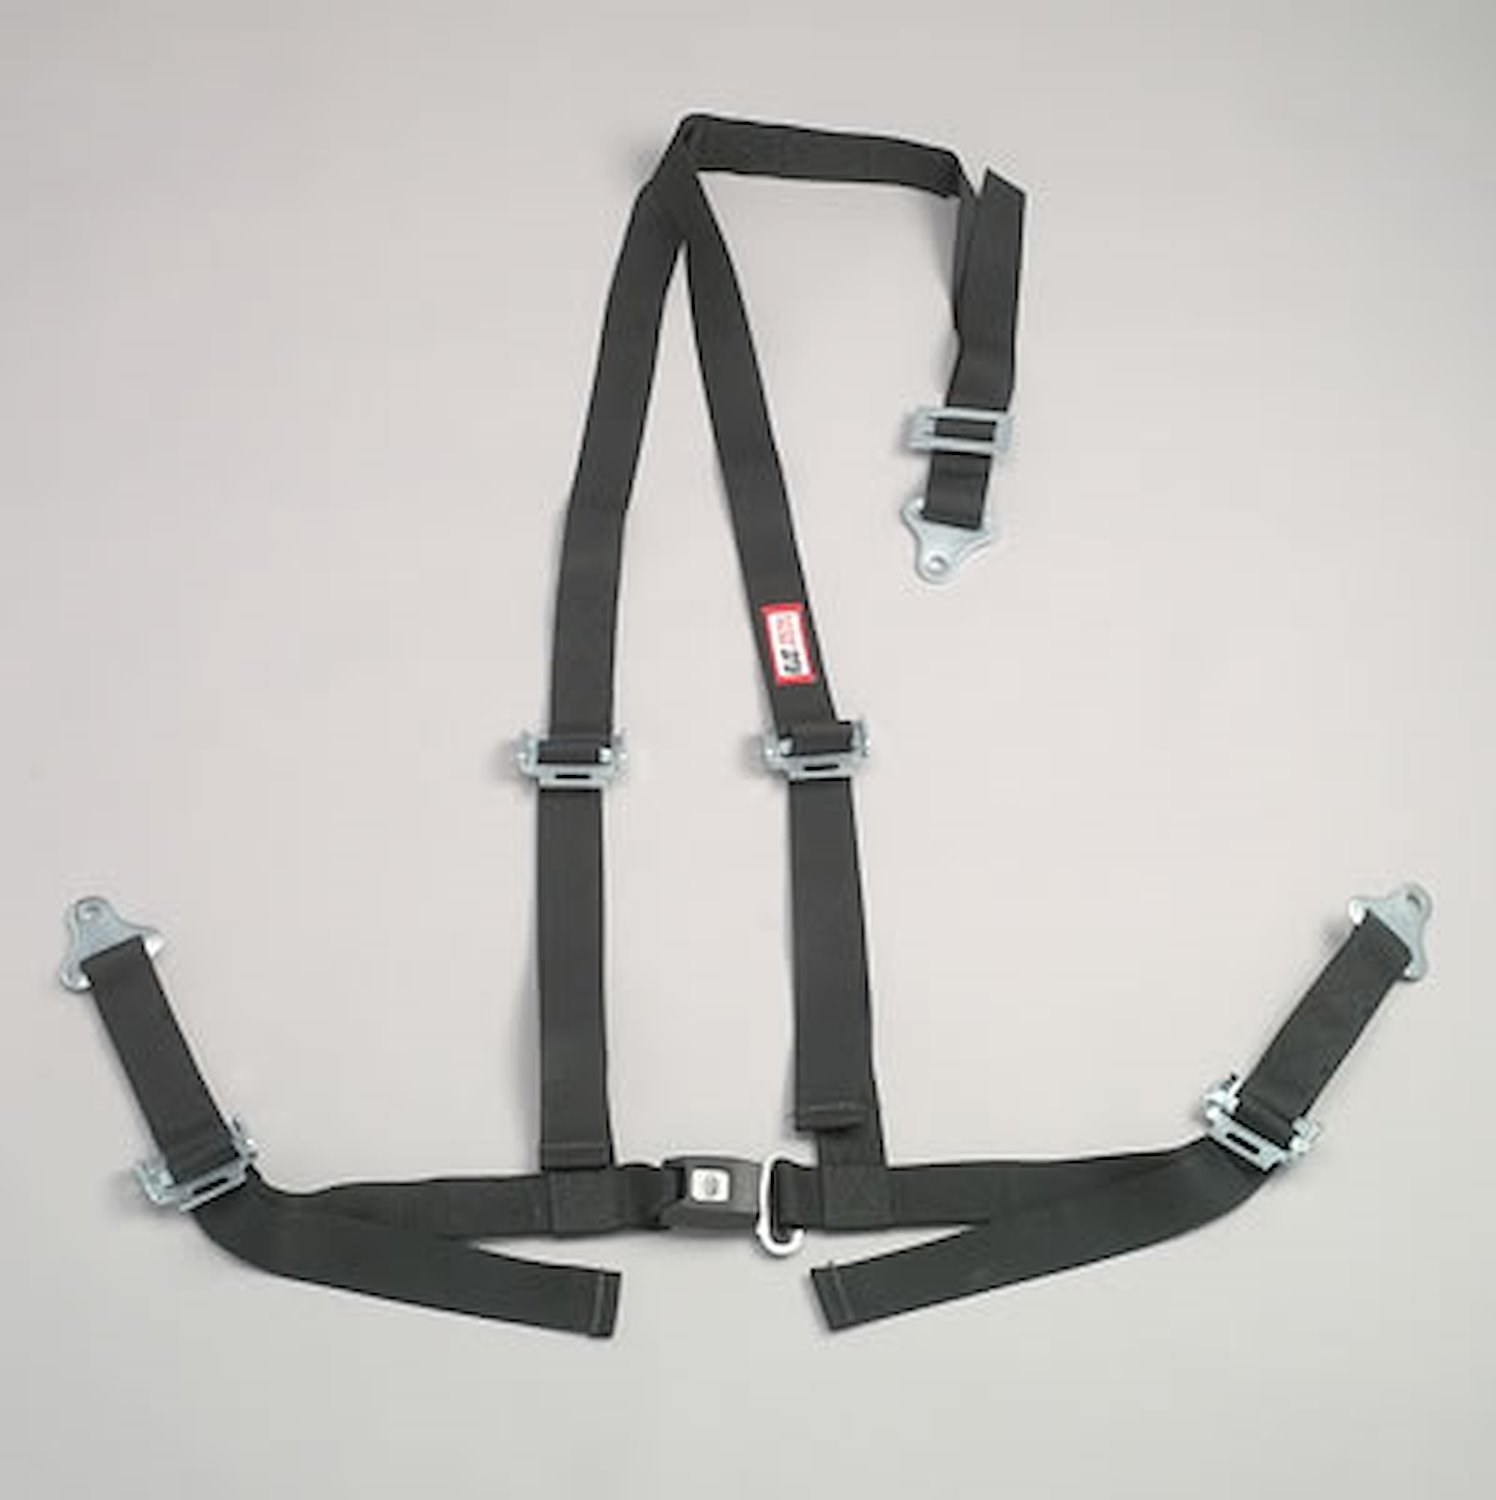 NON-SFI B&T HARNESS 2 PULL DOWN Lap Belt 2 S. H. V ROLL BAR Mount ALL WRAP ENDS w/STERNUM STRAP RED